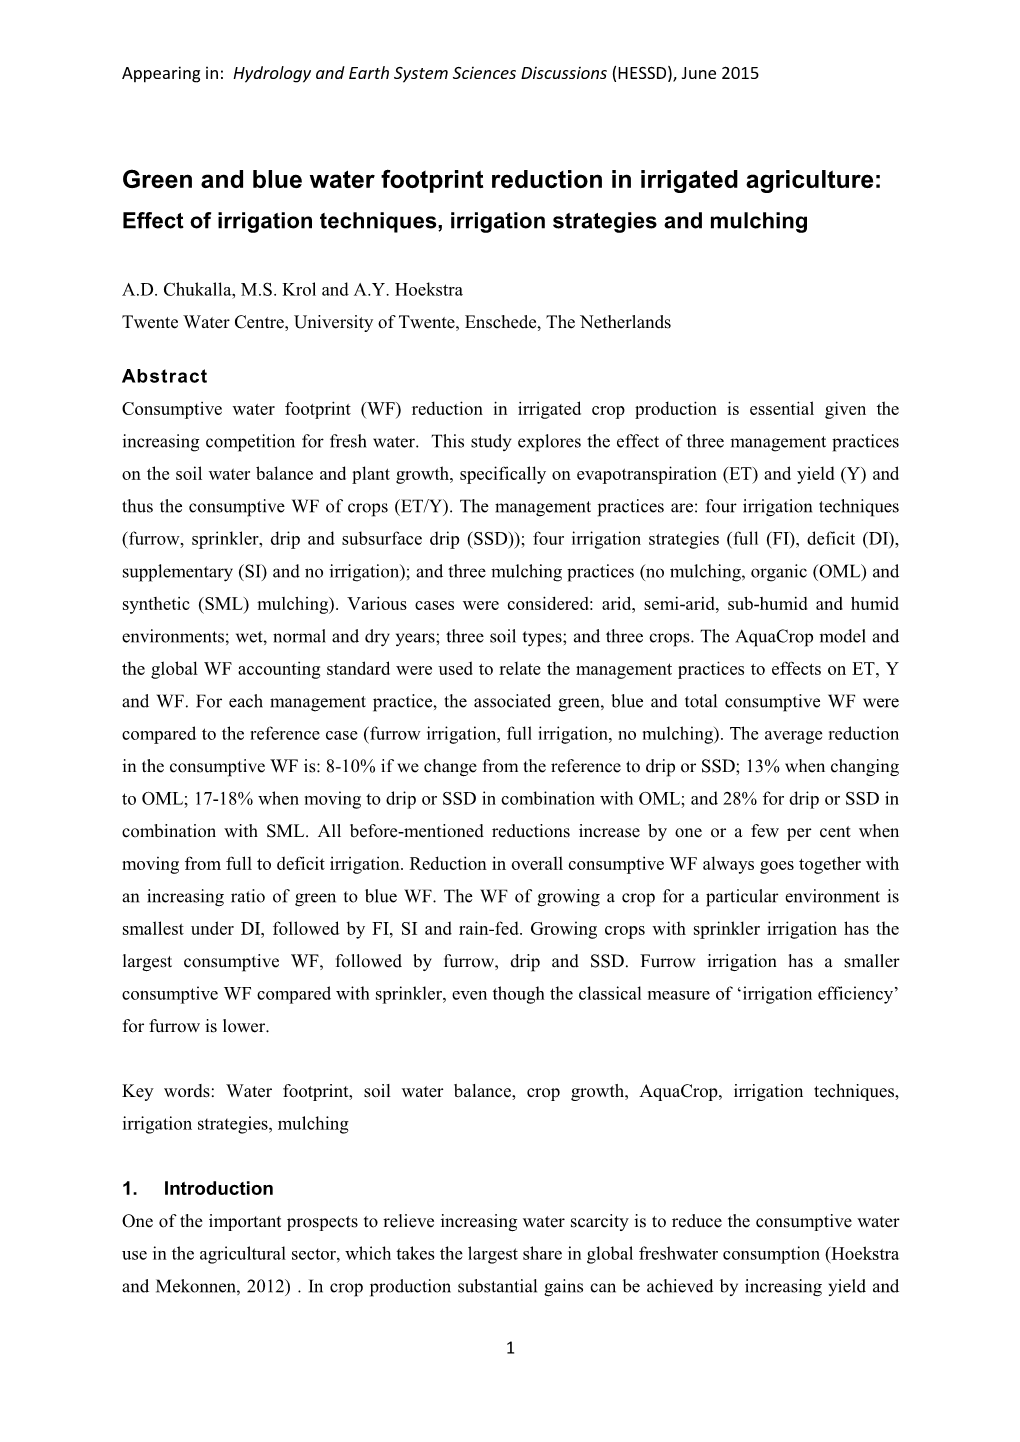 Green and Blue Water Footprint Reduction in Irrigated Agriculture: Effect of Irrigation Techniques, Irrigation Strategies and Mulching